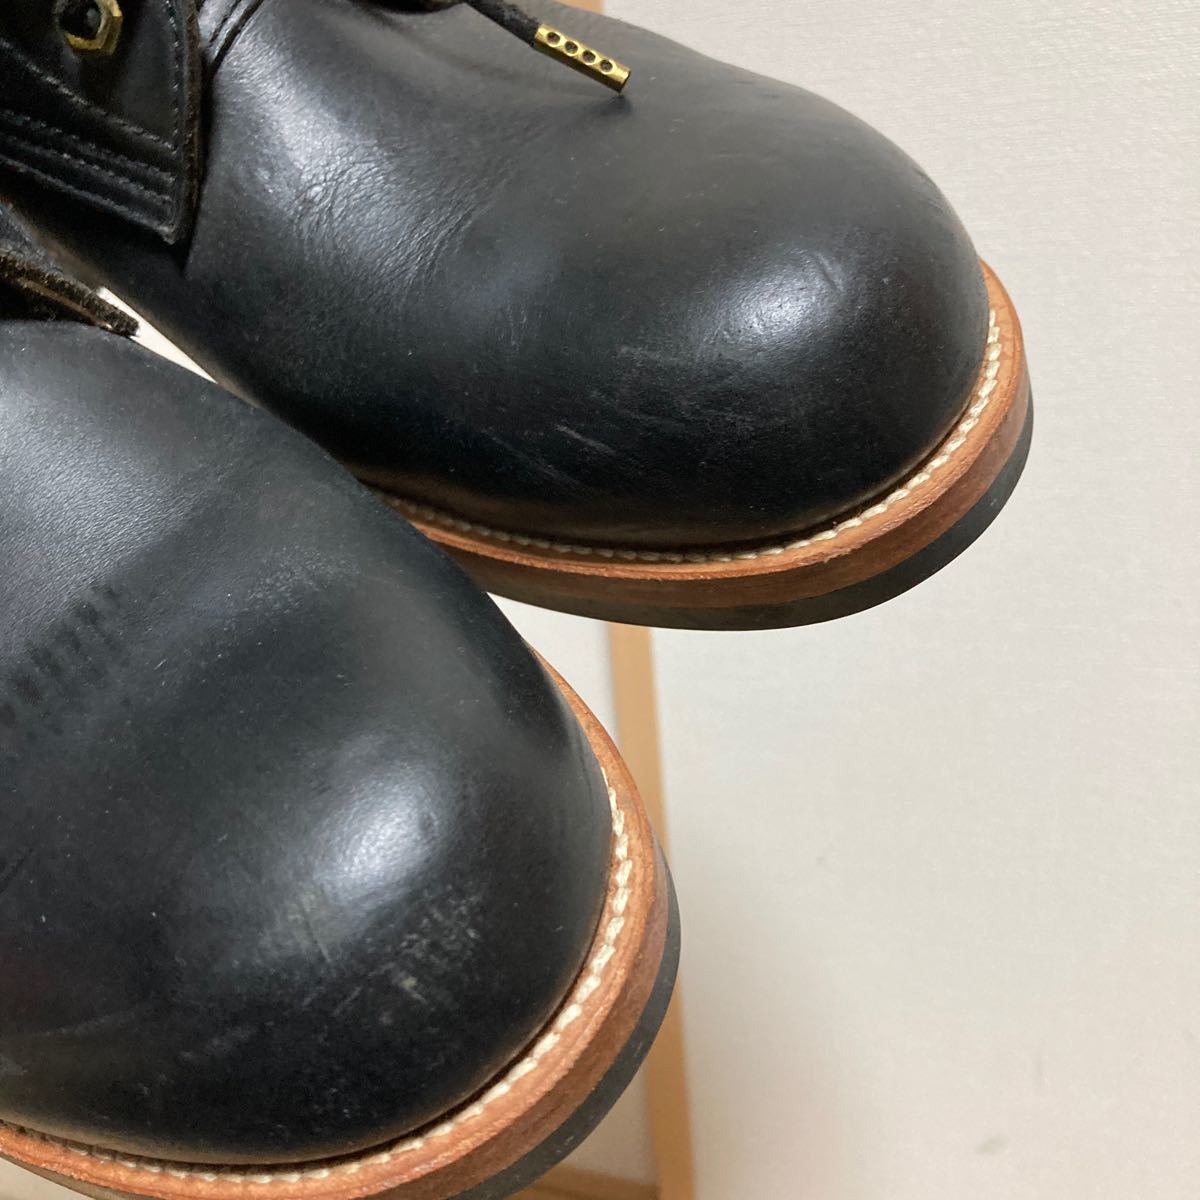 REVIVAL 90% PRODUCTS by Varde77 バルデセブンティーセブン U.S. OIL LEATHER WORK BOOTS BLACK サイズ8_画像5